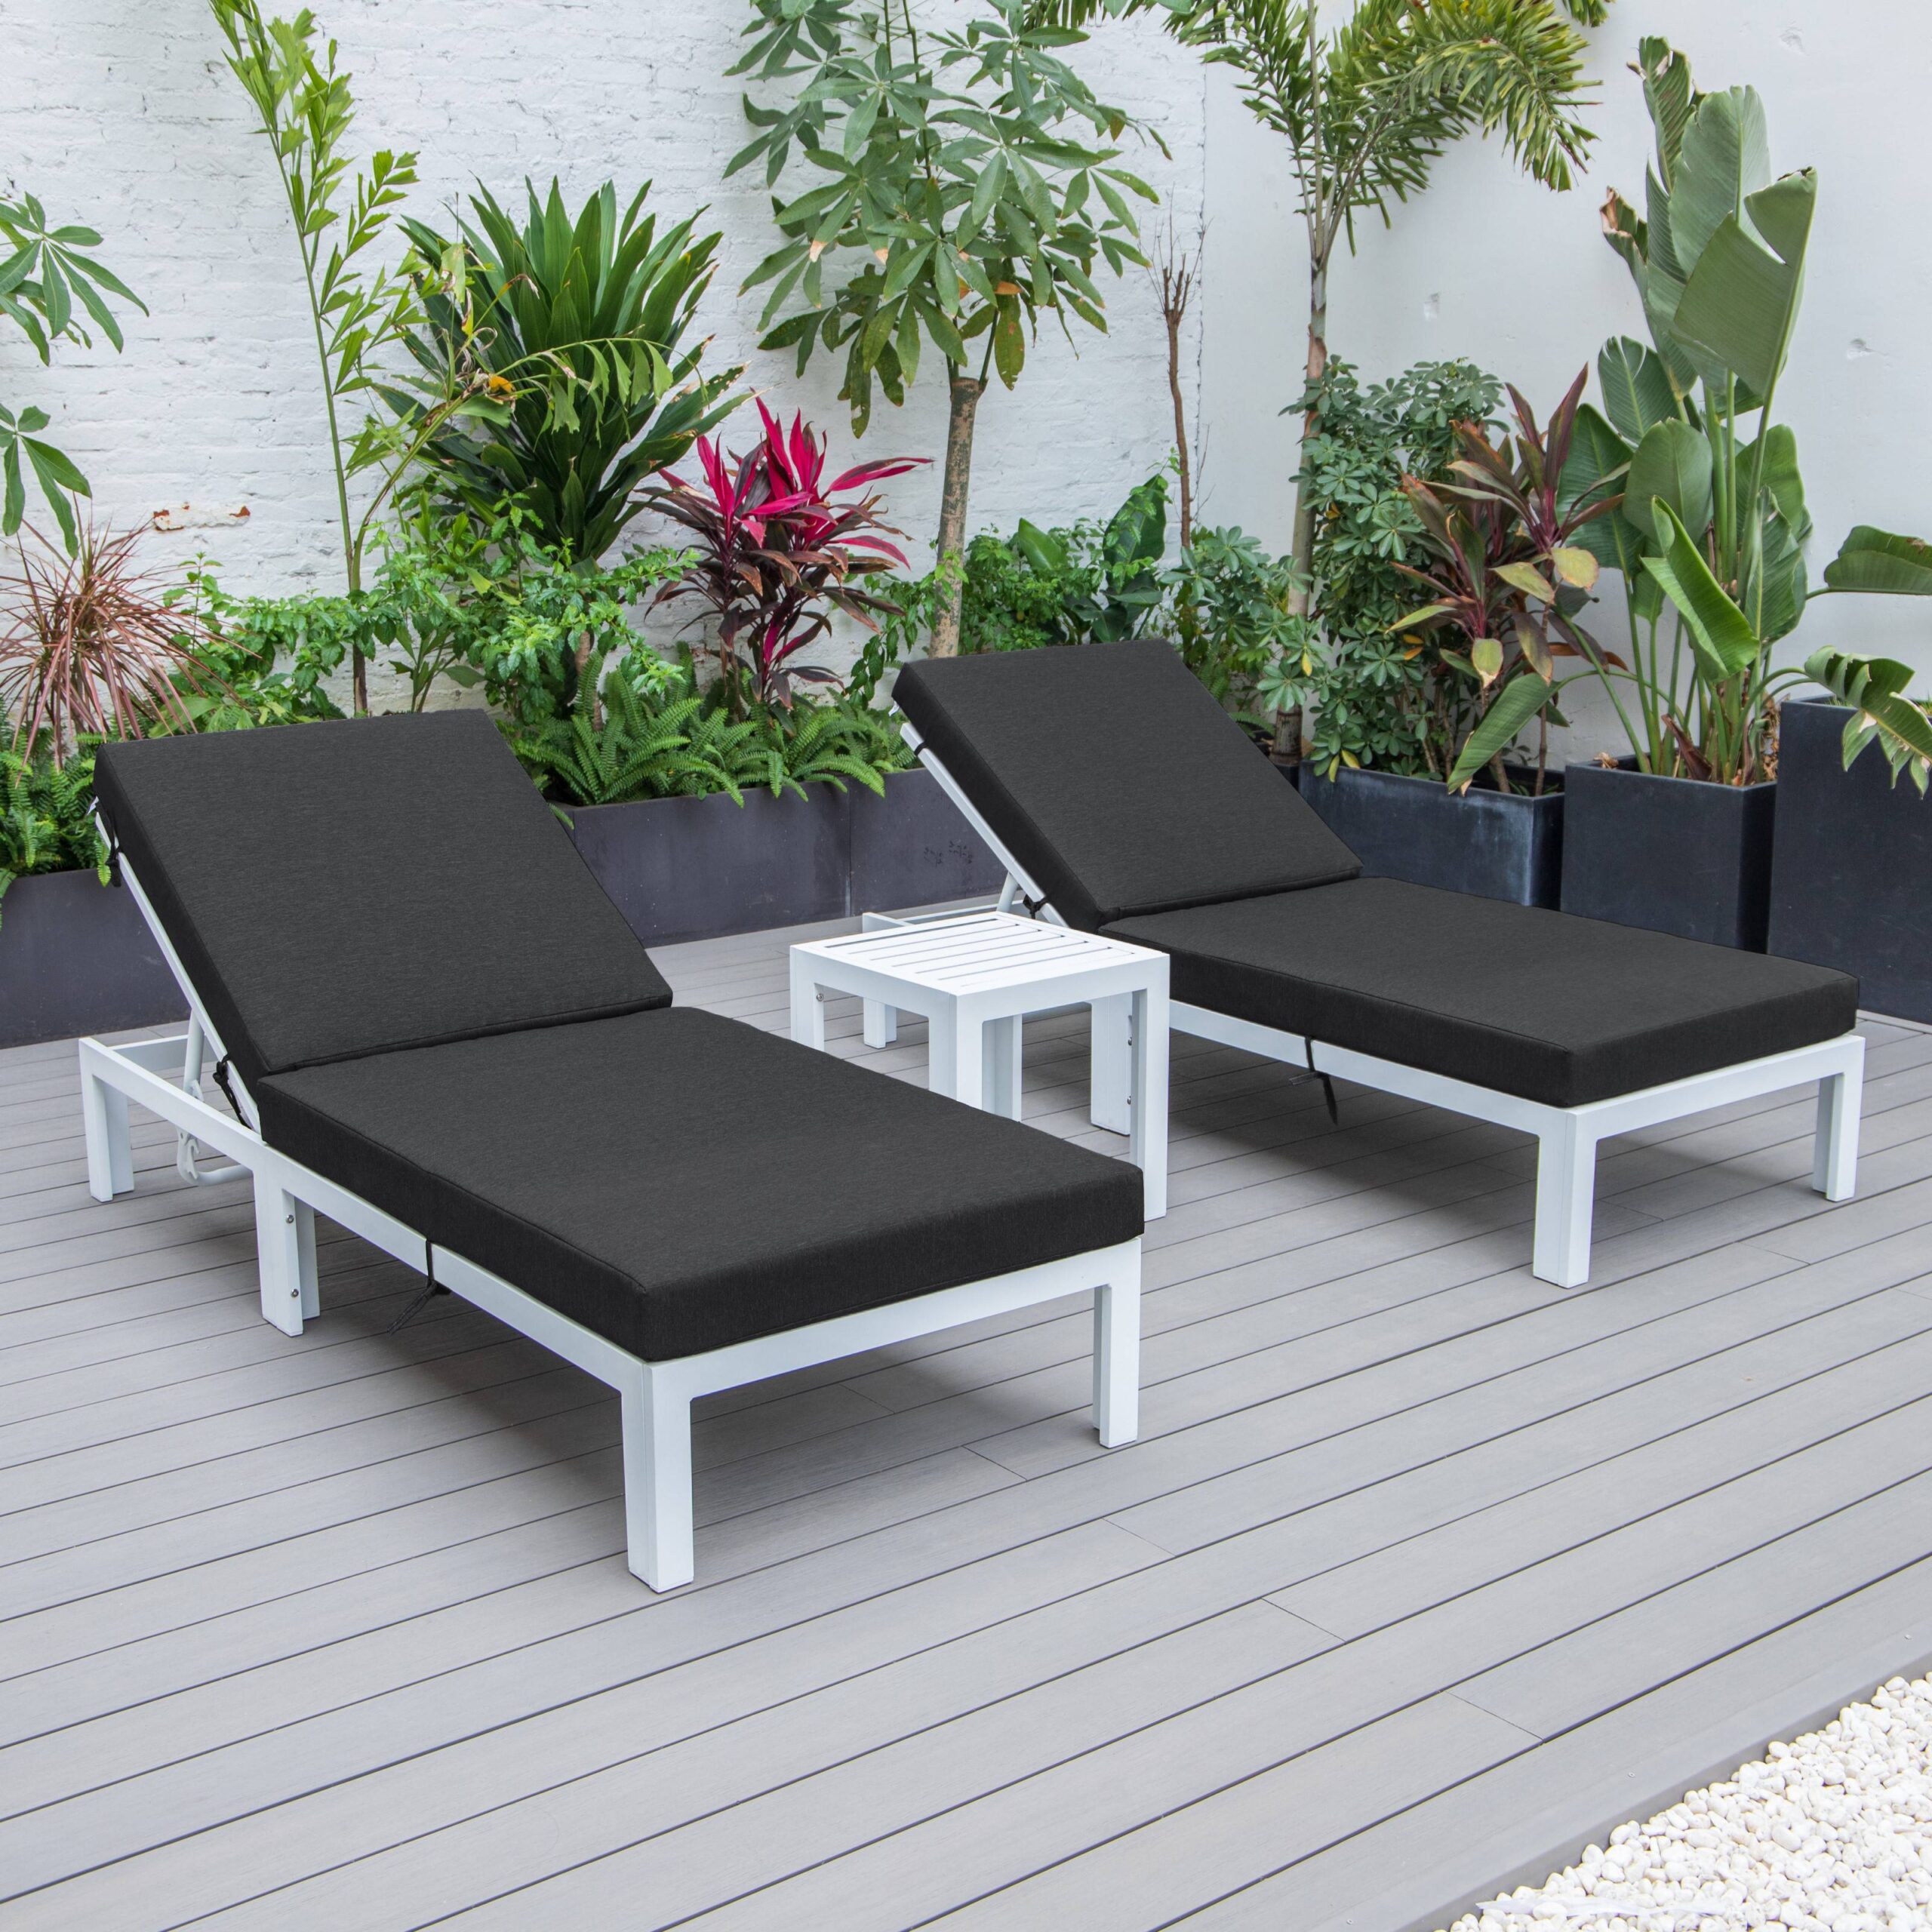 LeisureMod Chelsea Modern White Aluminum Outdoor Chaise Lounge Chair Set of 2 With Side Table & Black Cushions - image 2 of 12